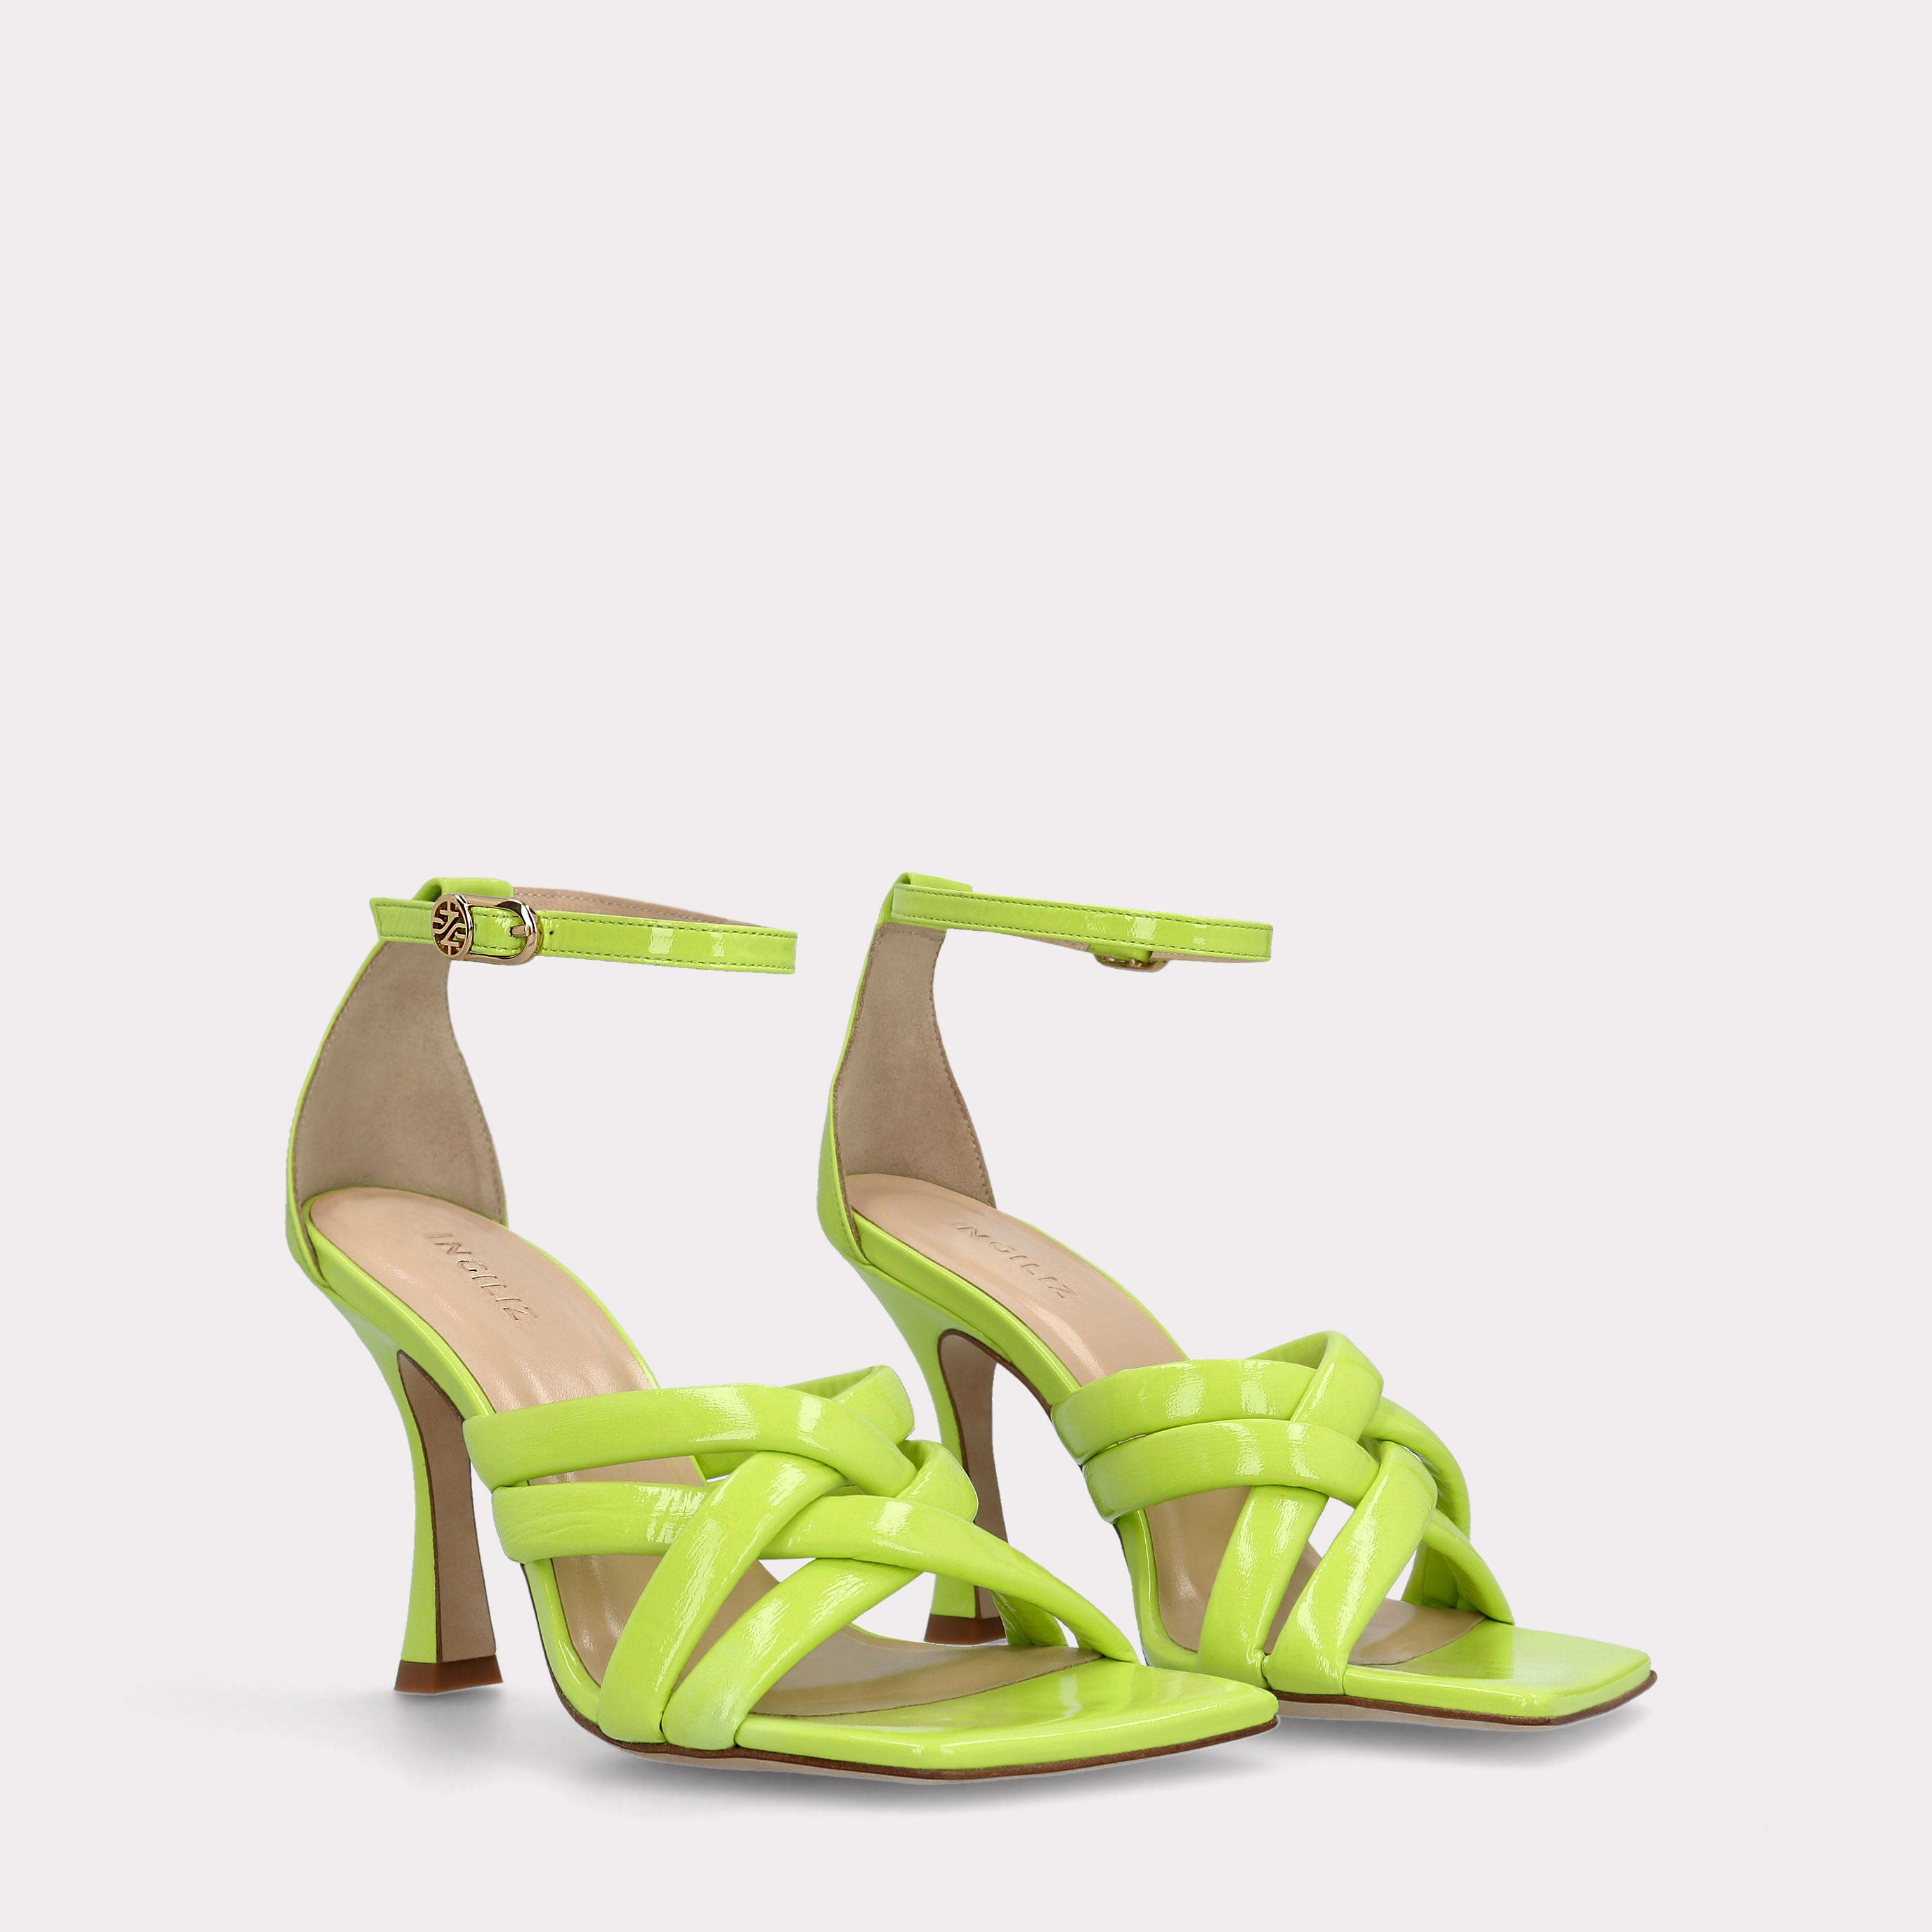 BETTY 02 POISON GREEN LEATHER SANDALS